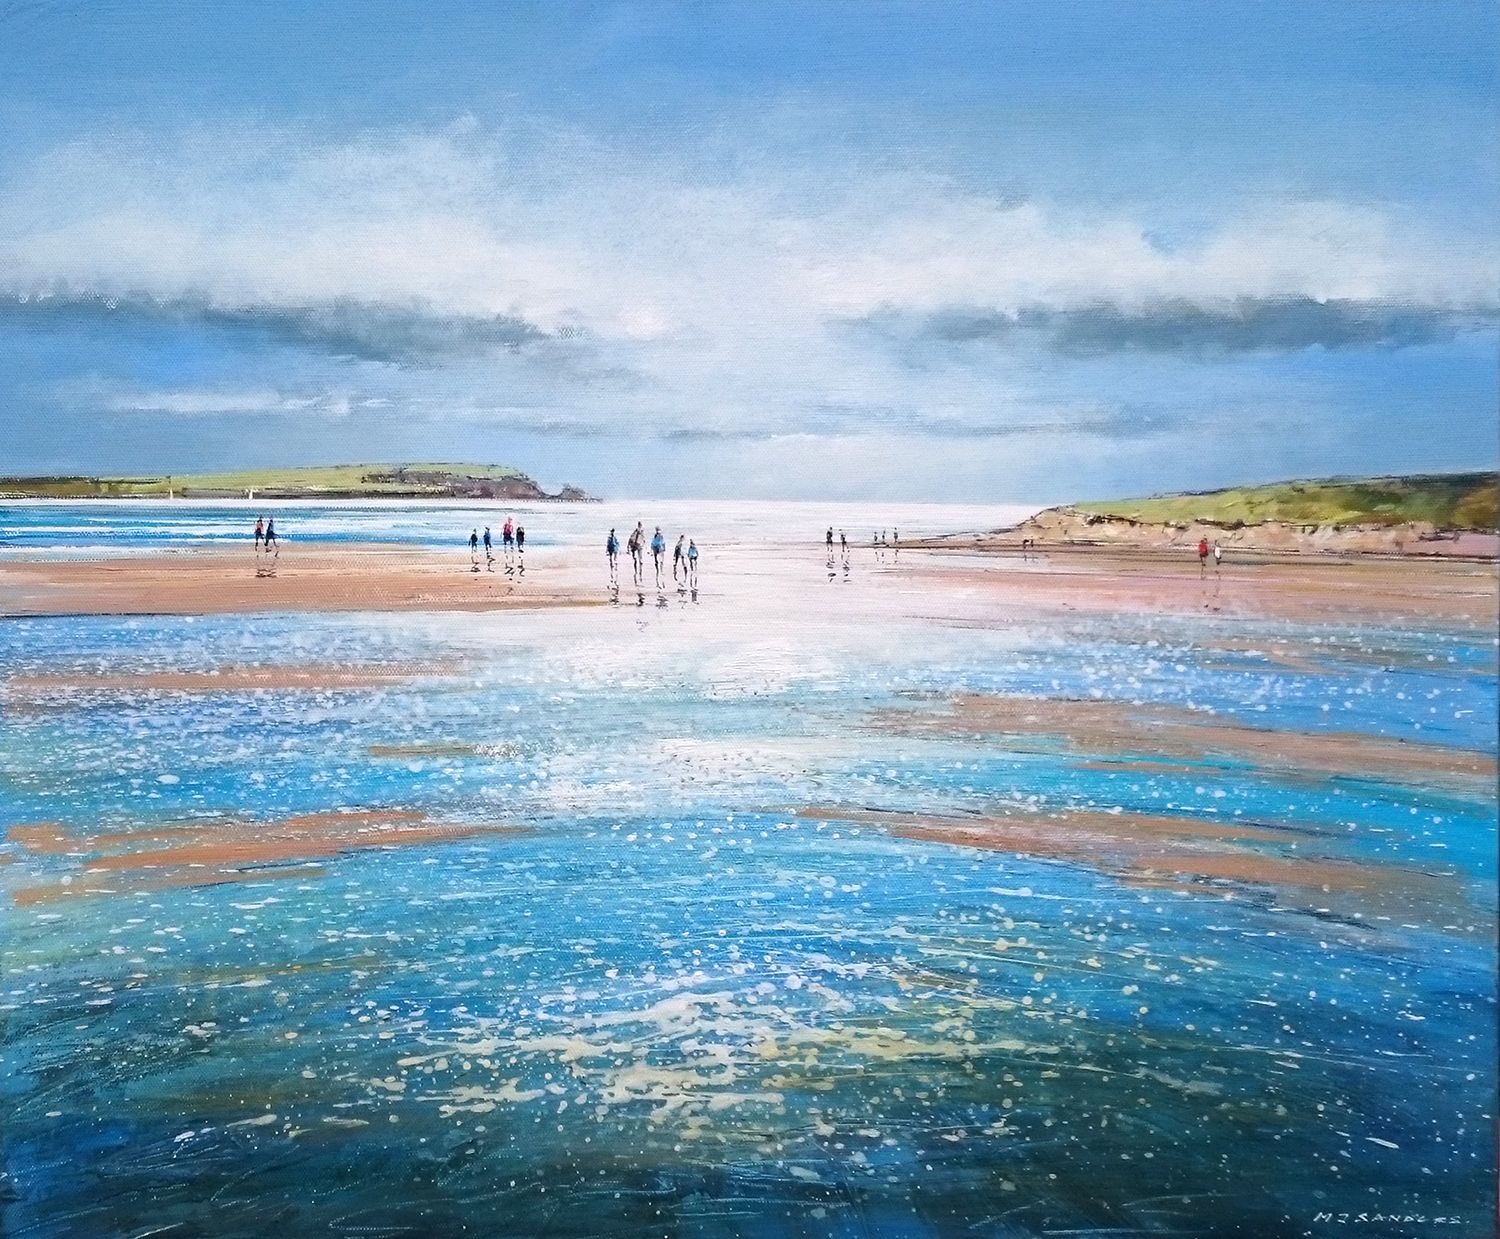 Commission an Artist - Daymer Bay by Michael Sanders